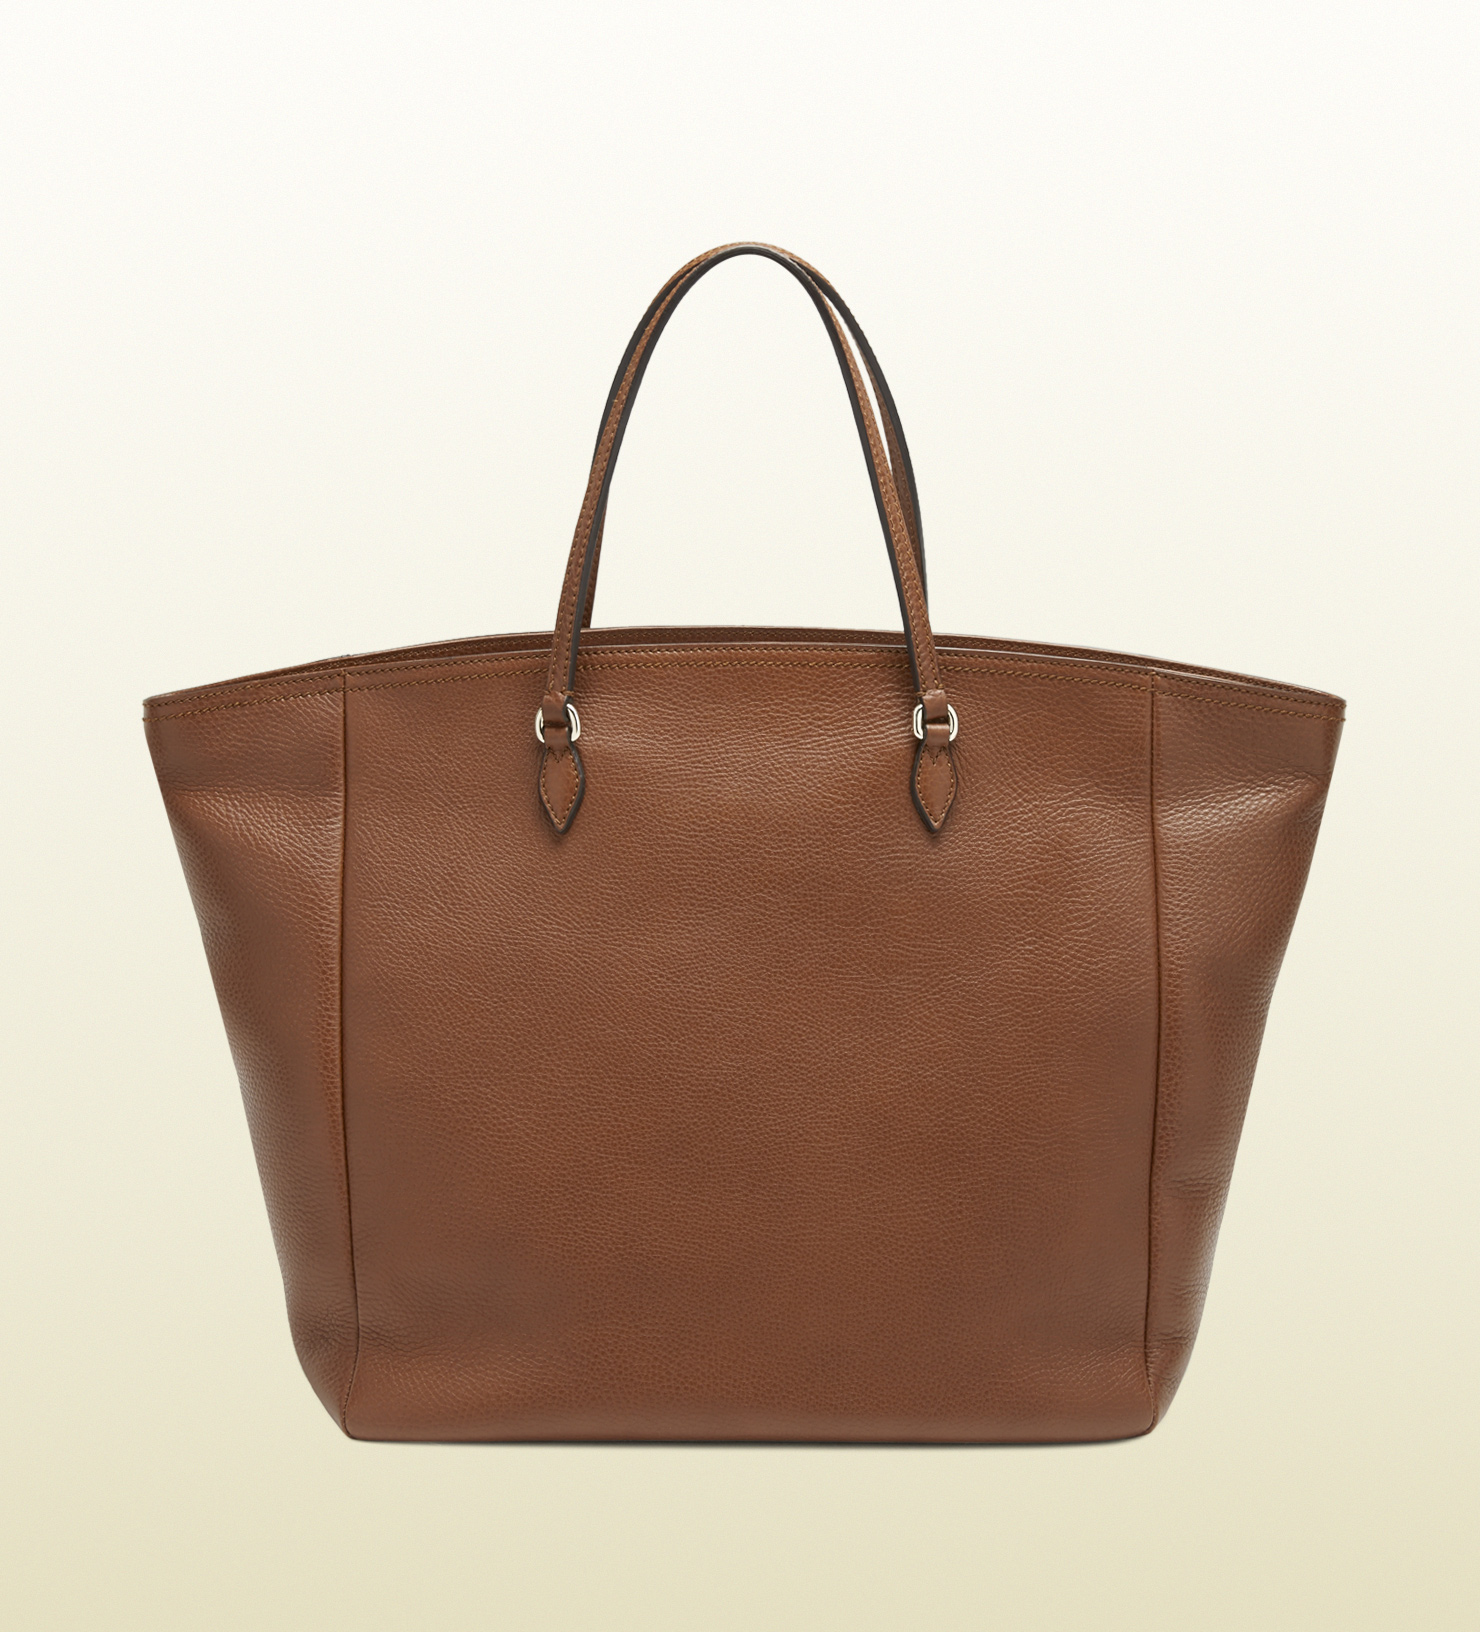 Gucci Bree Leather Tote in Gold (Brown) - Lyst